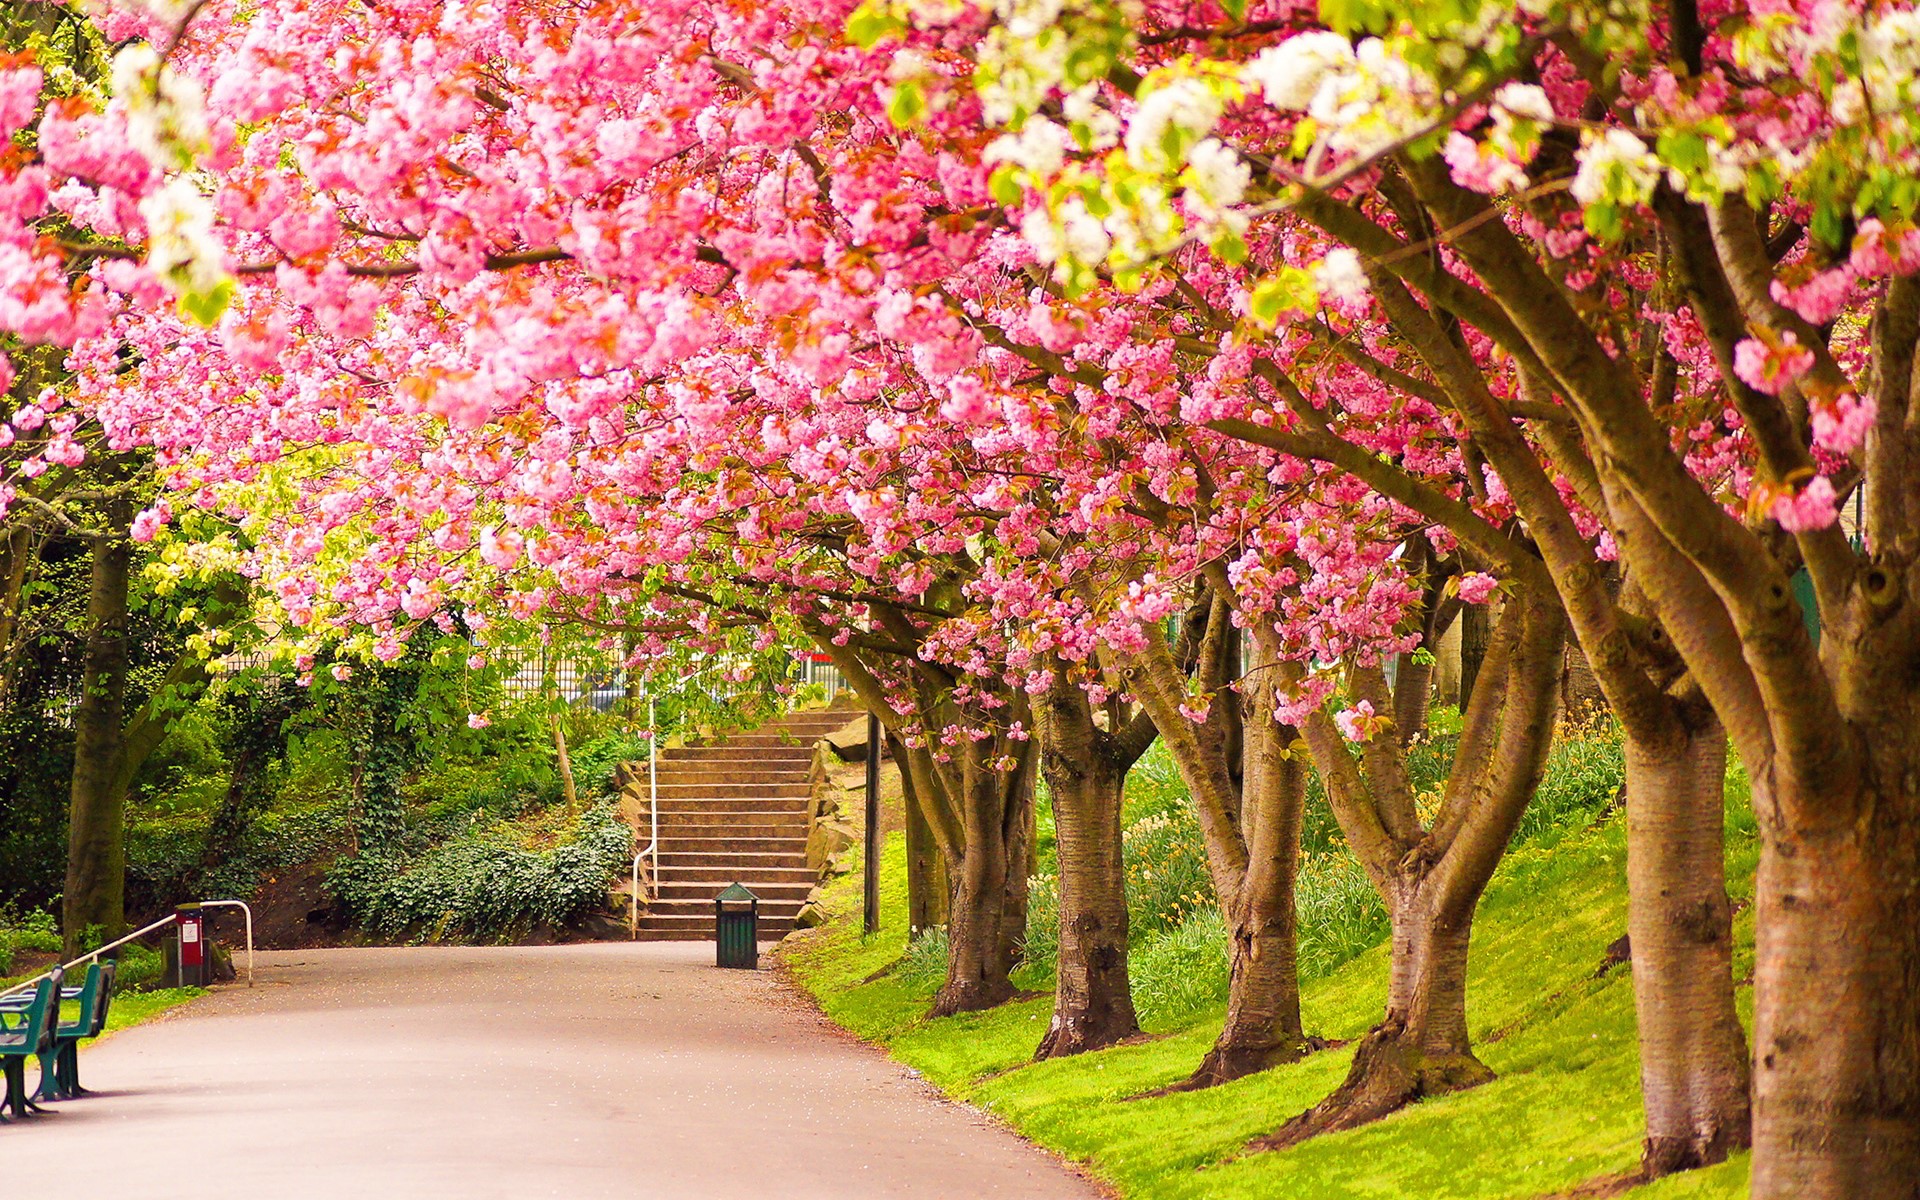 Spring Wallpapers HD download free